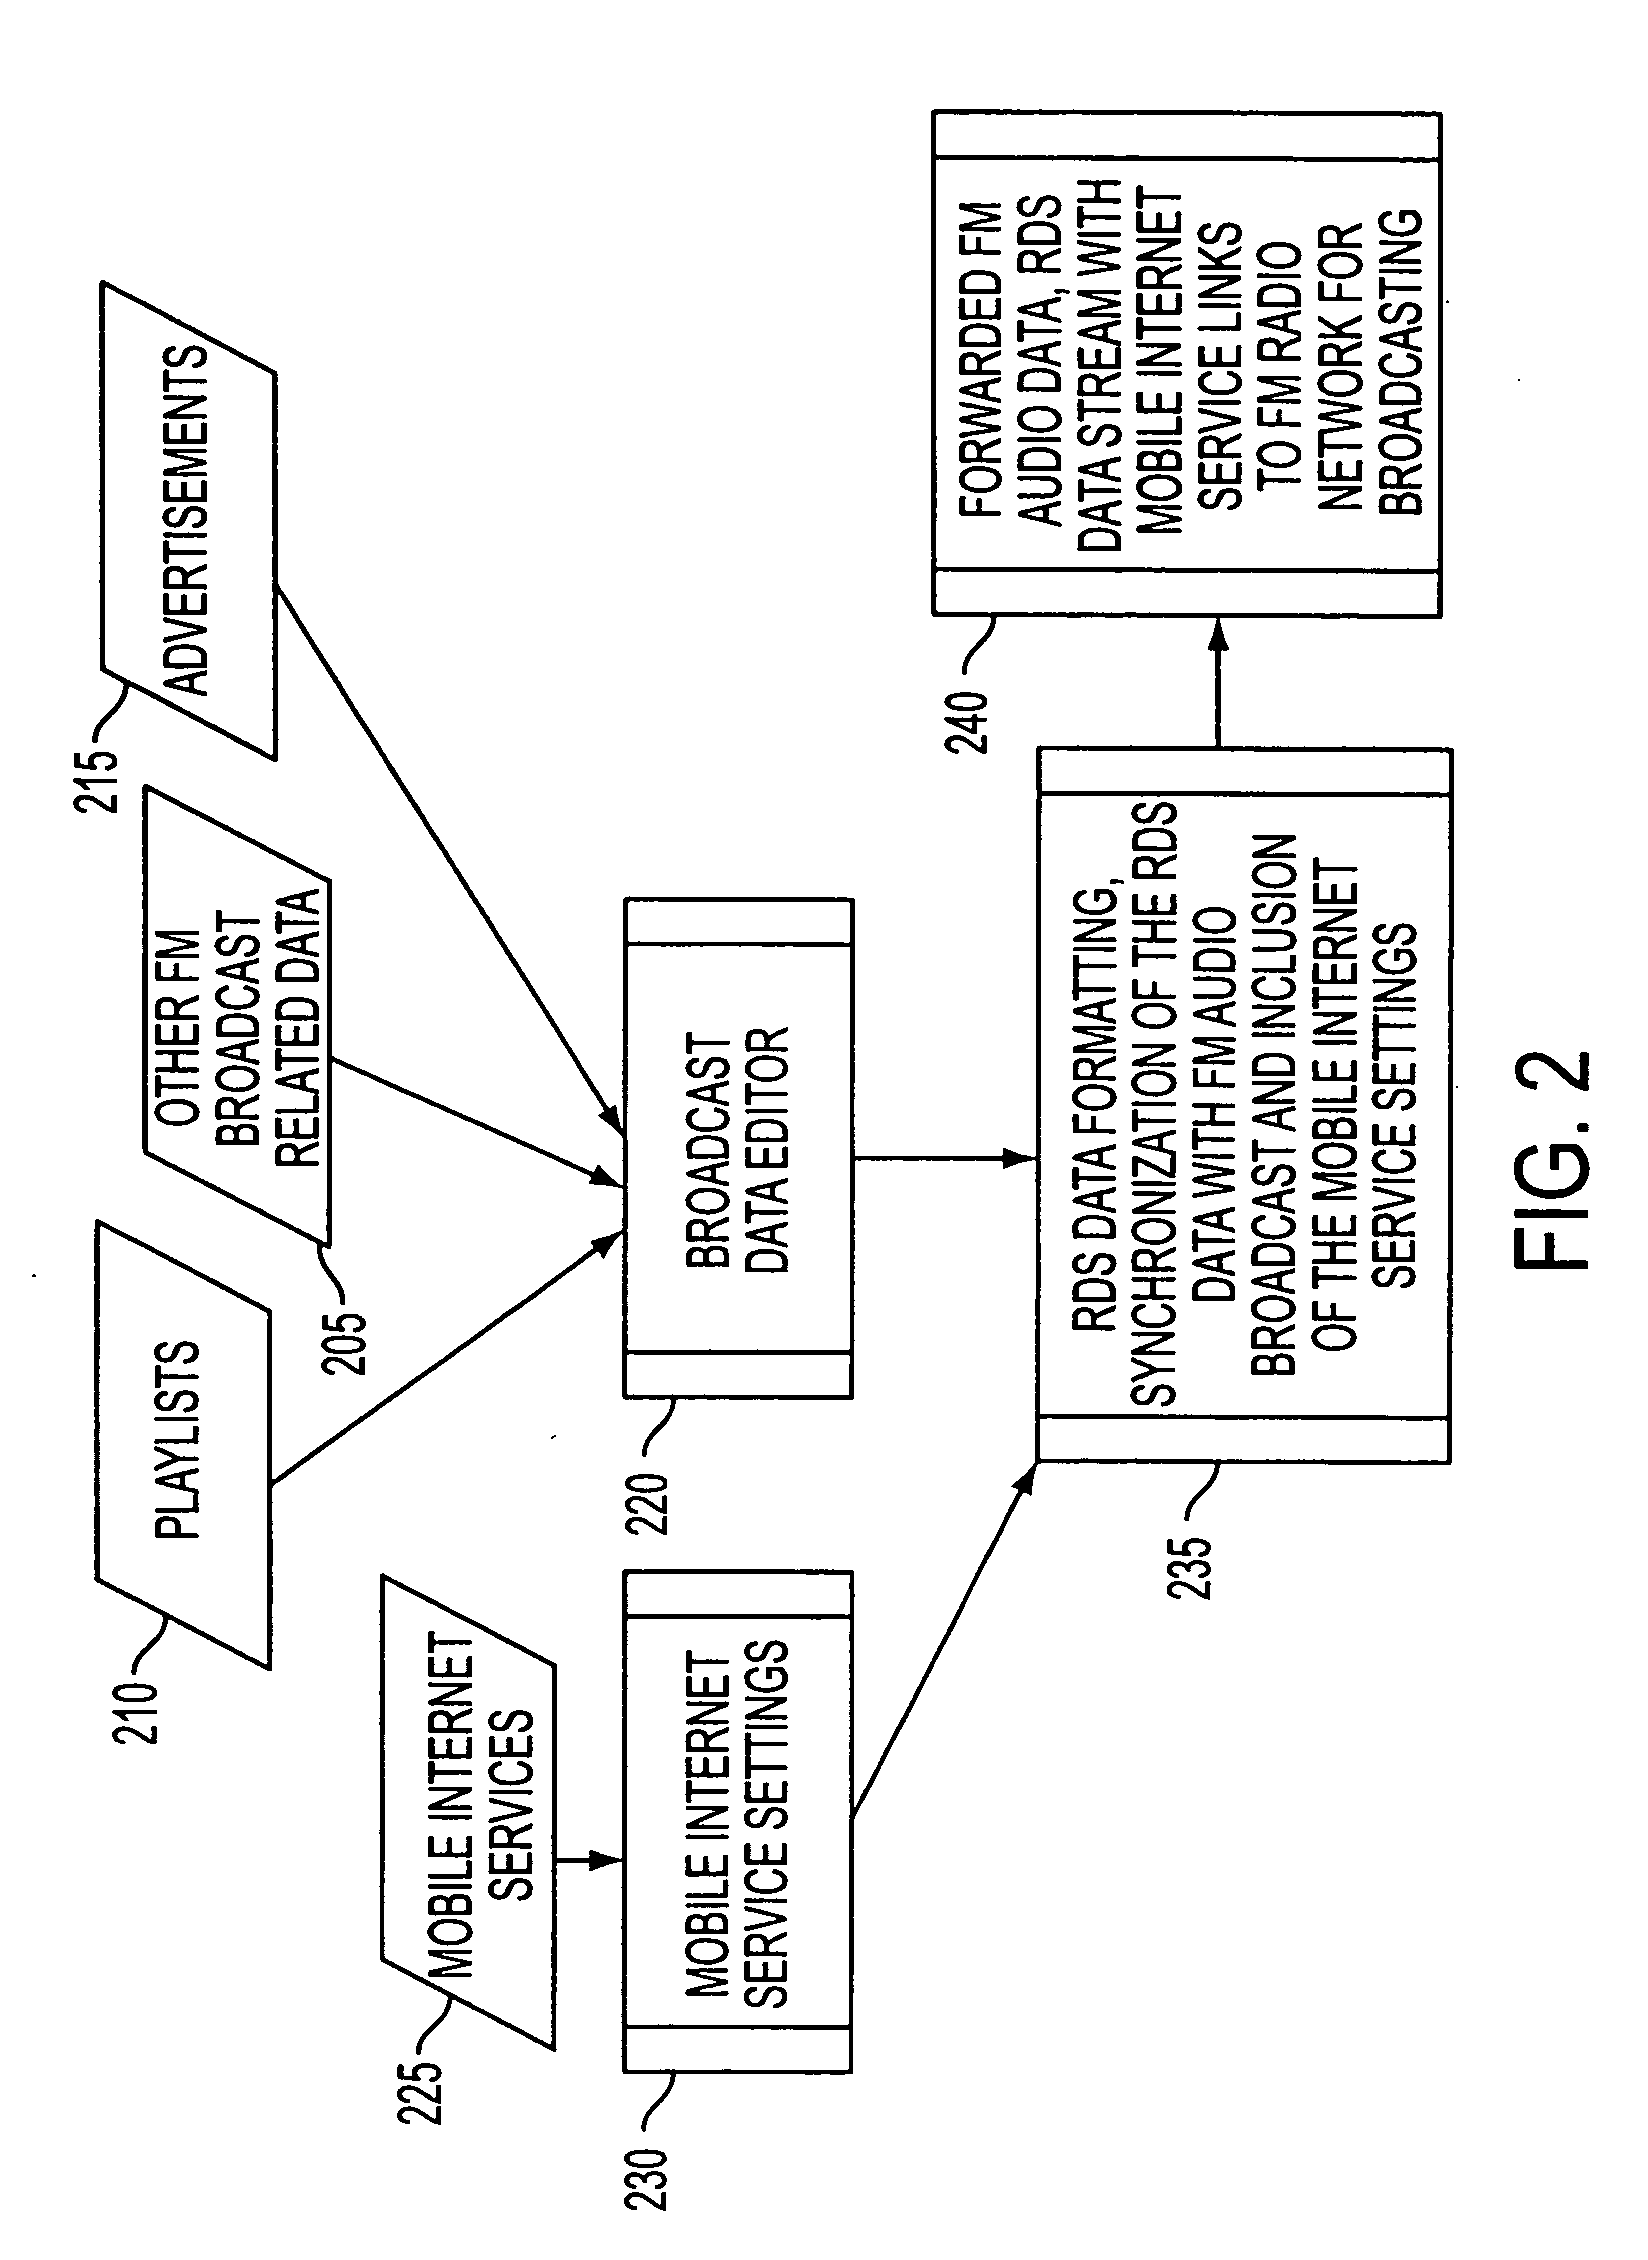 Two channel communication system using RDS datastream broadcasting